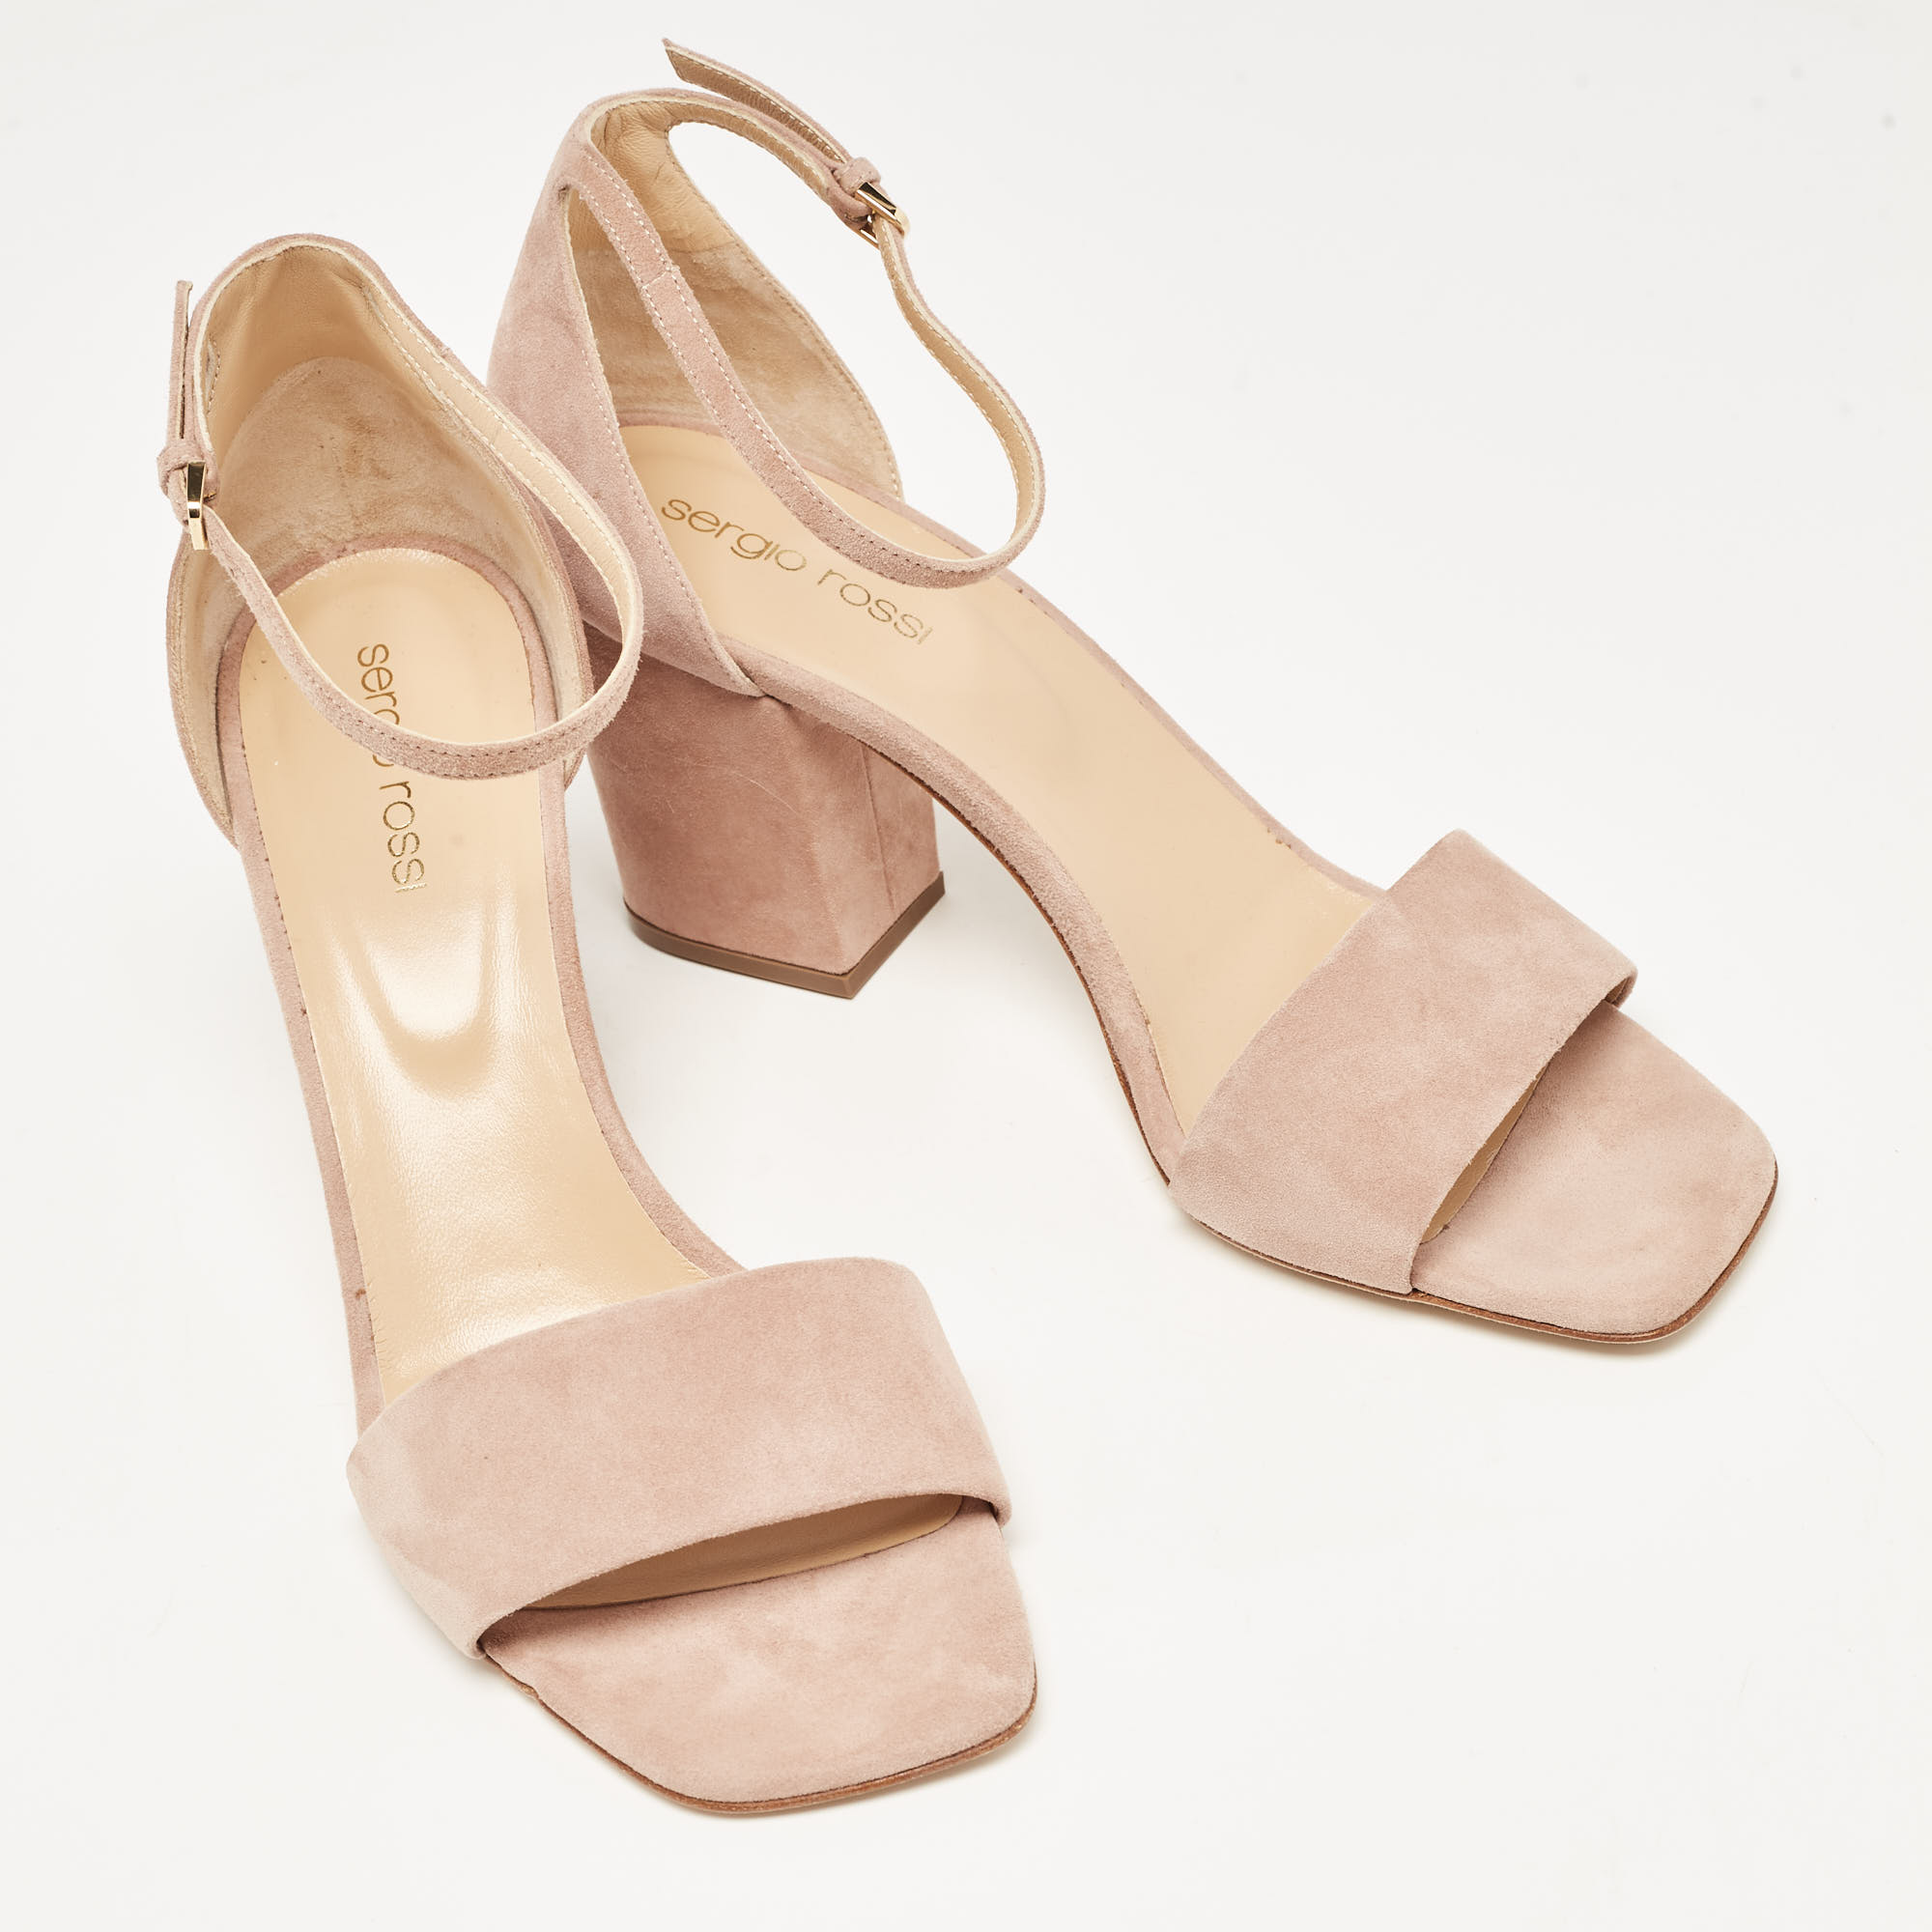 Sergio Rossi Beige Suede Ankle Strap Sandals Size 39